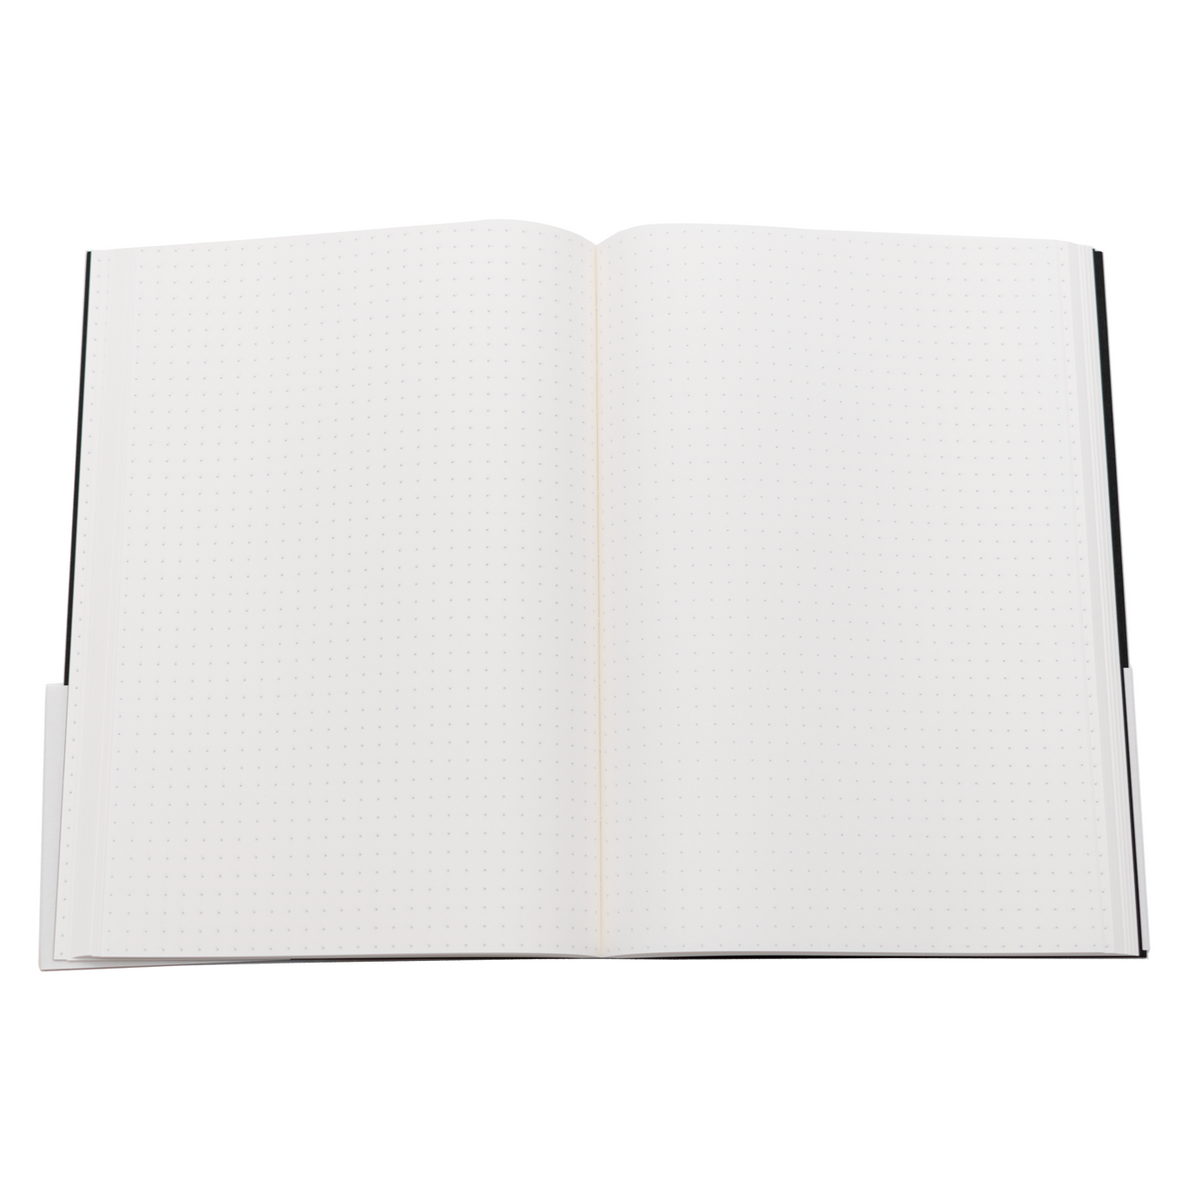 Tomoe River Hard Cover White 52gsm 368 Page A5 Notebook - Dot Grid